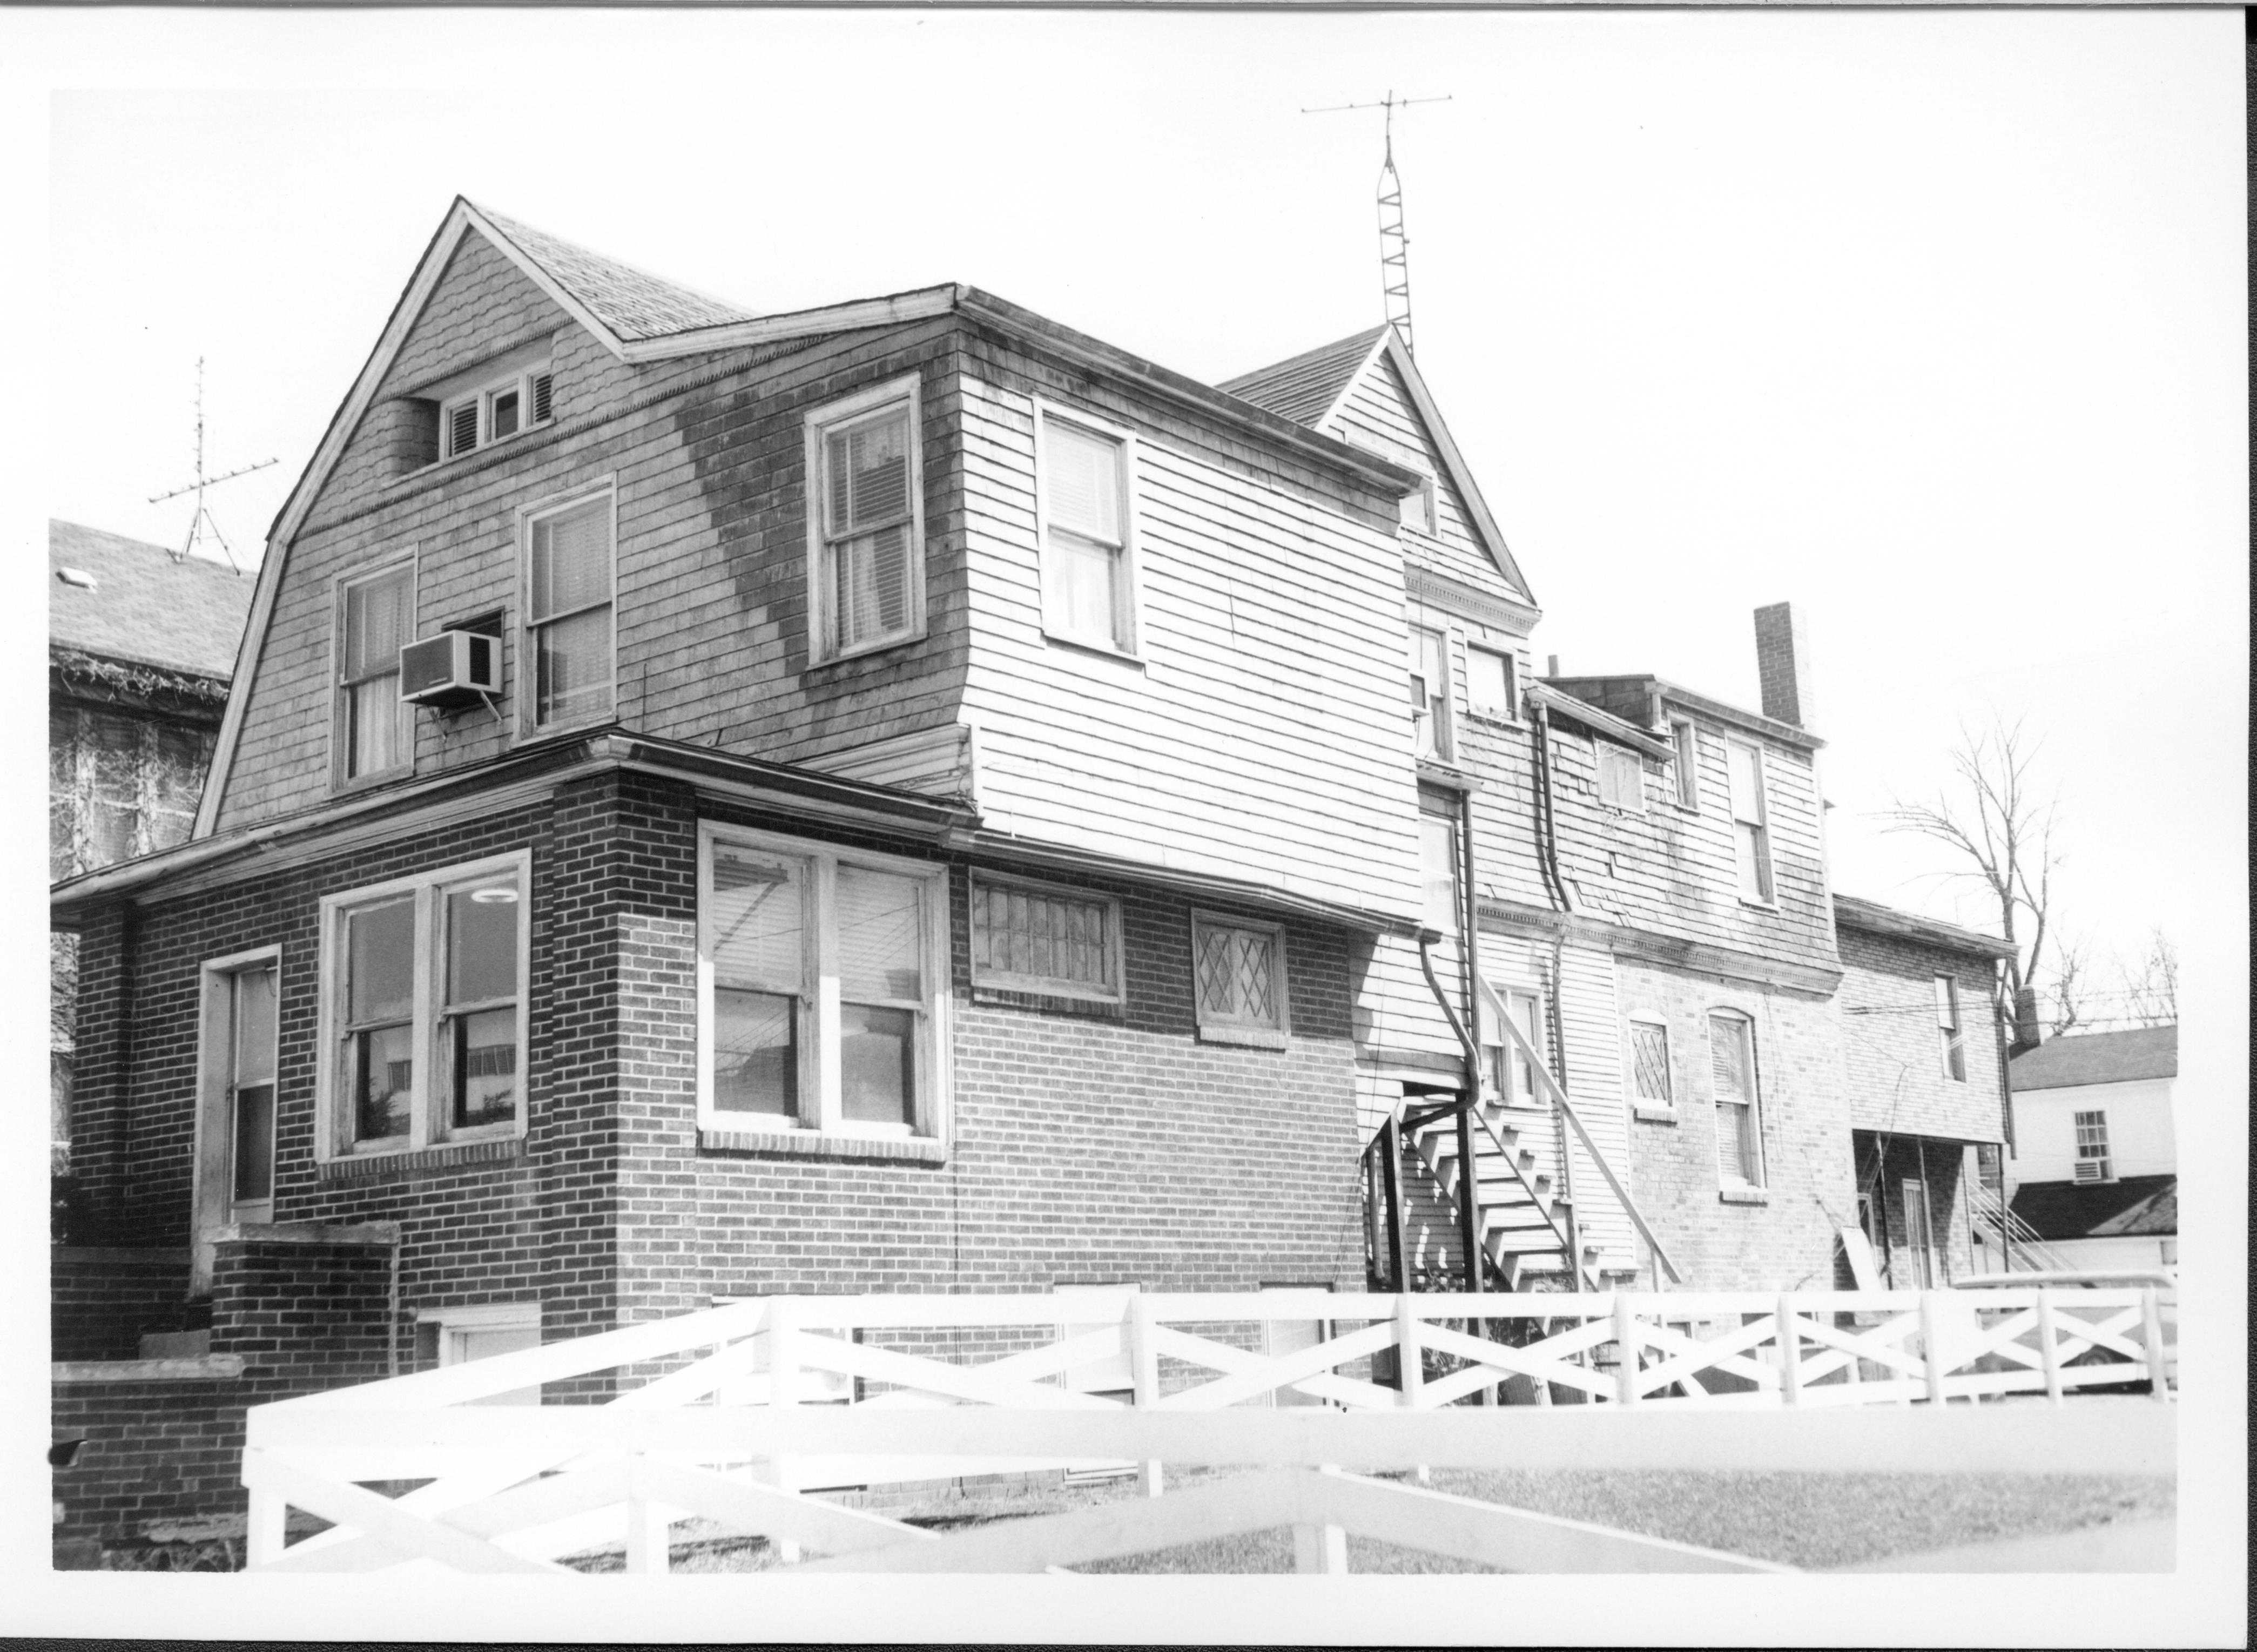 House owned by Bernard W. Bowman in use as apartments, Block 7, Lots 16 & 15 along Capitol Ave. The Beedle house (with overhang) and Dean House (with air conditioner in window) are in background right.  Area is now empty Walters lot  Looking Southeast from Capitol Ave. Bowman, Capitol Ave, Walters lot, Beedle, Dean